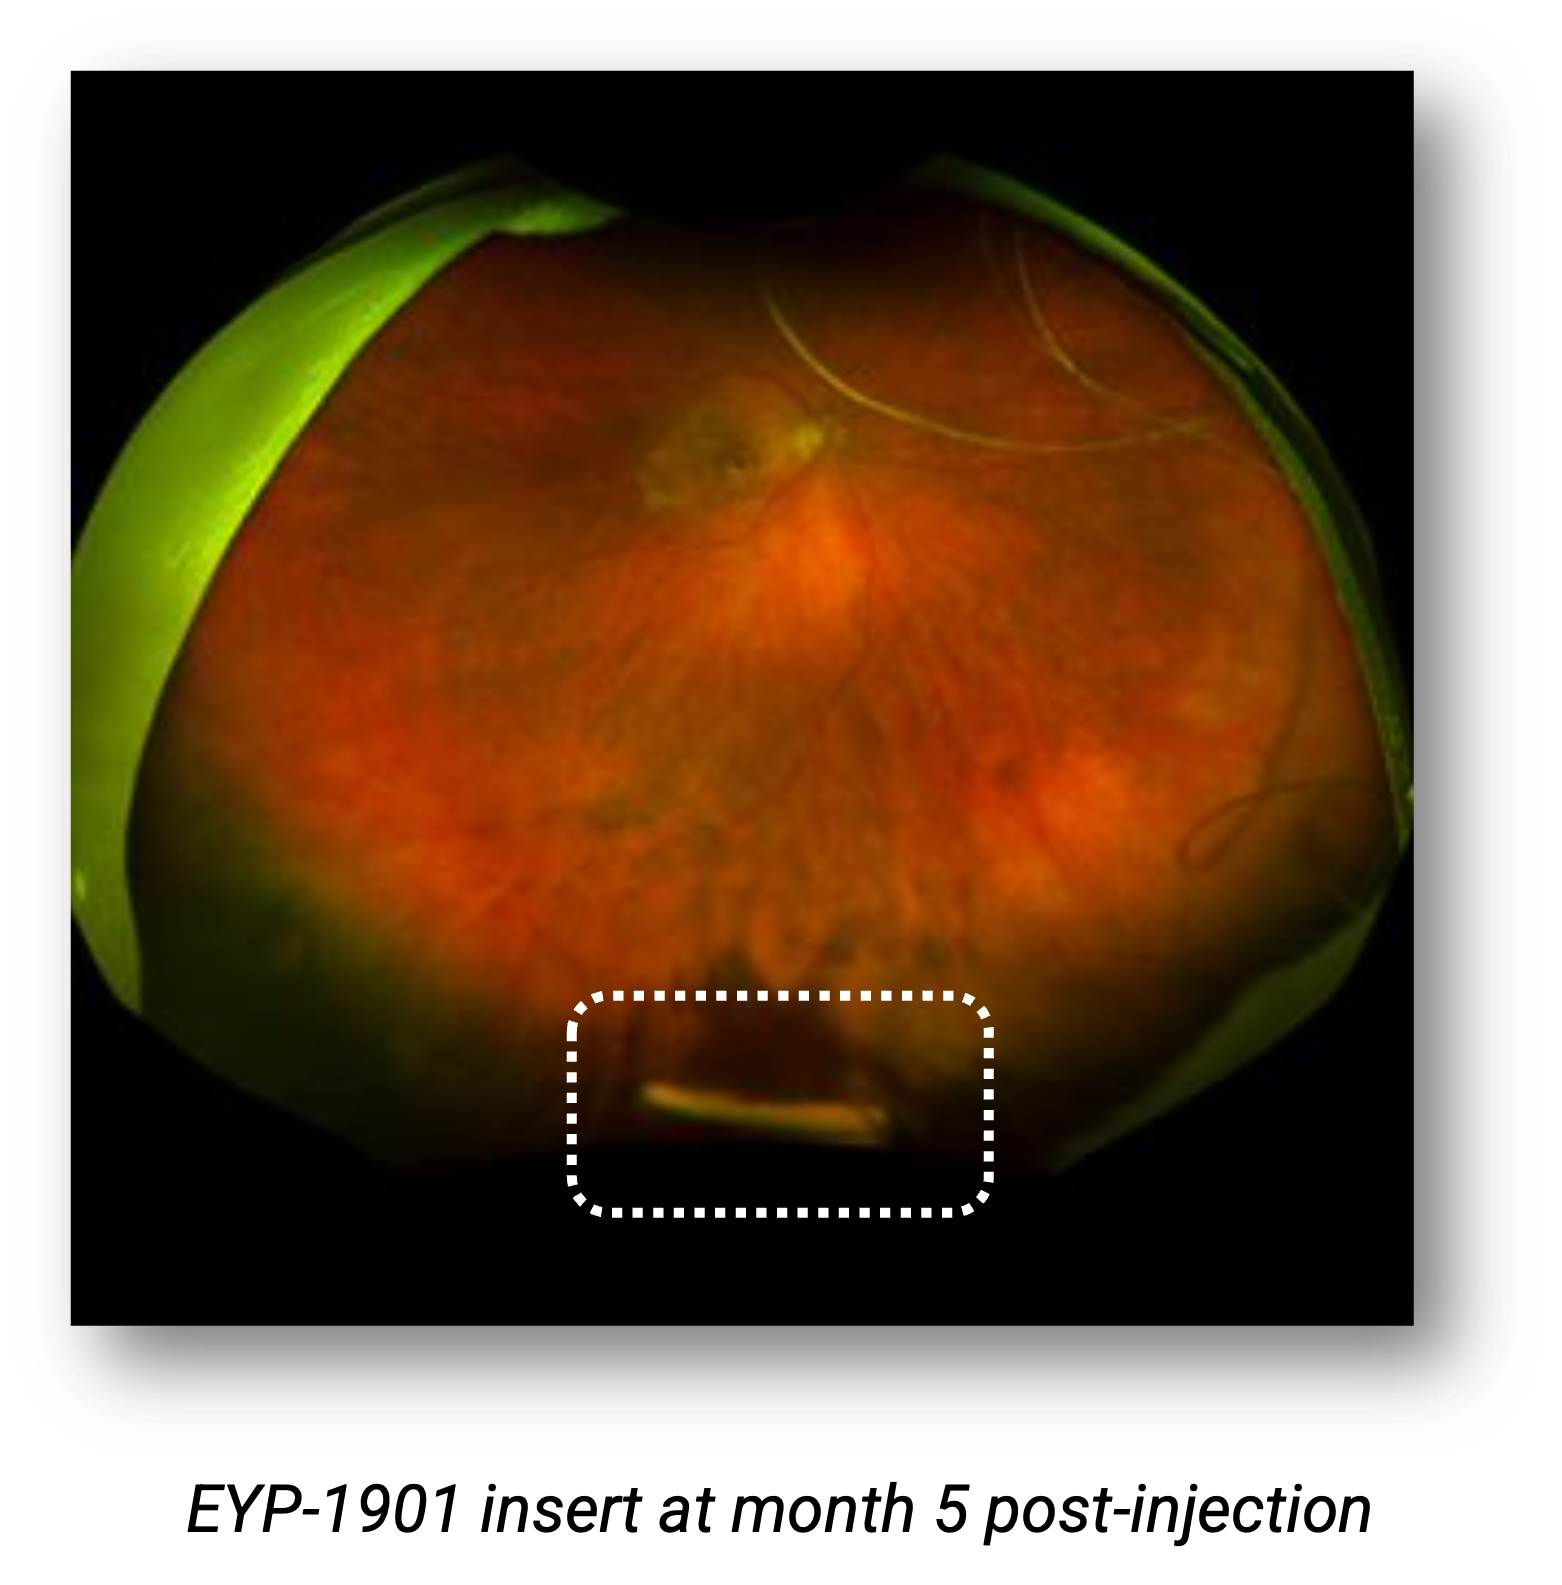 An EYP-1901 implant in the vitreous cavity of a patient from the DAVIO trial